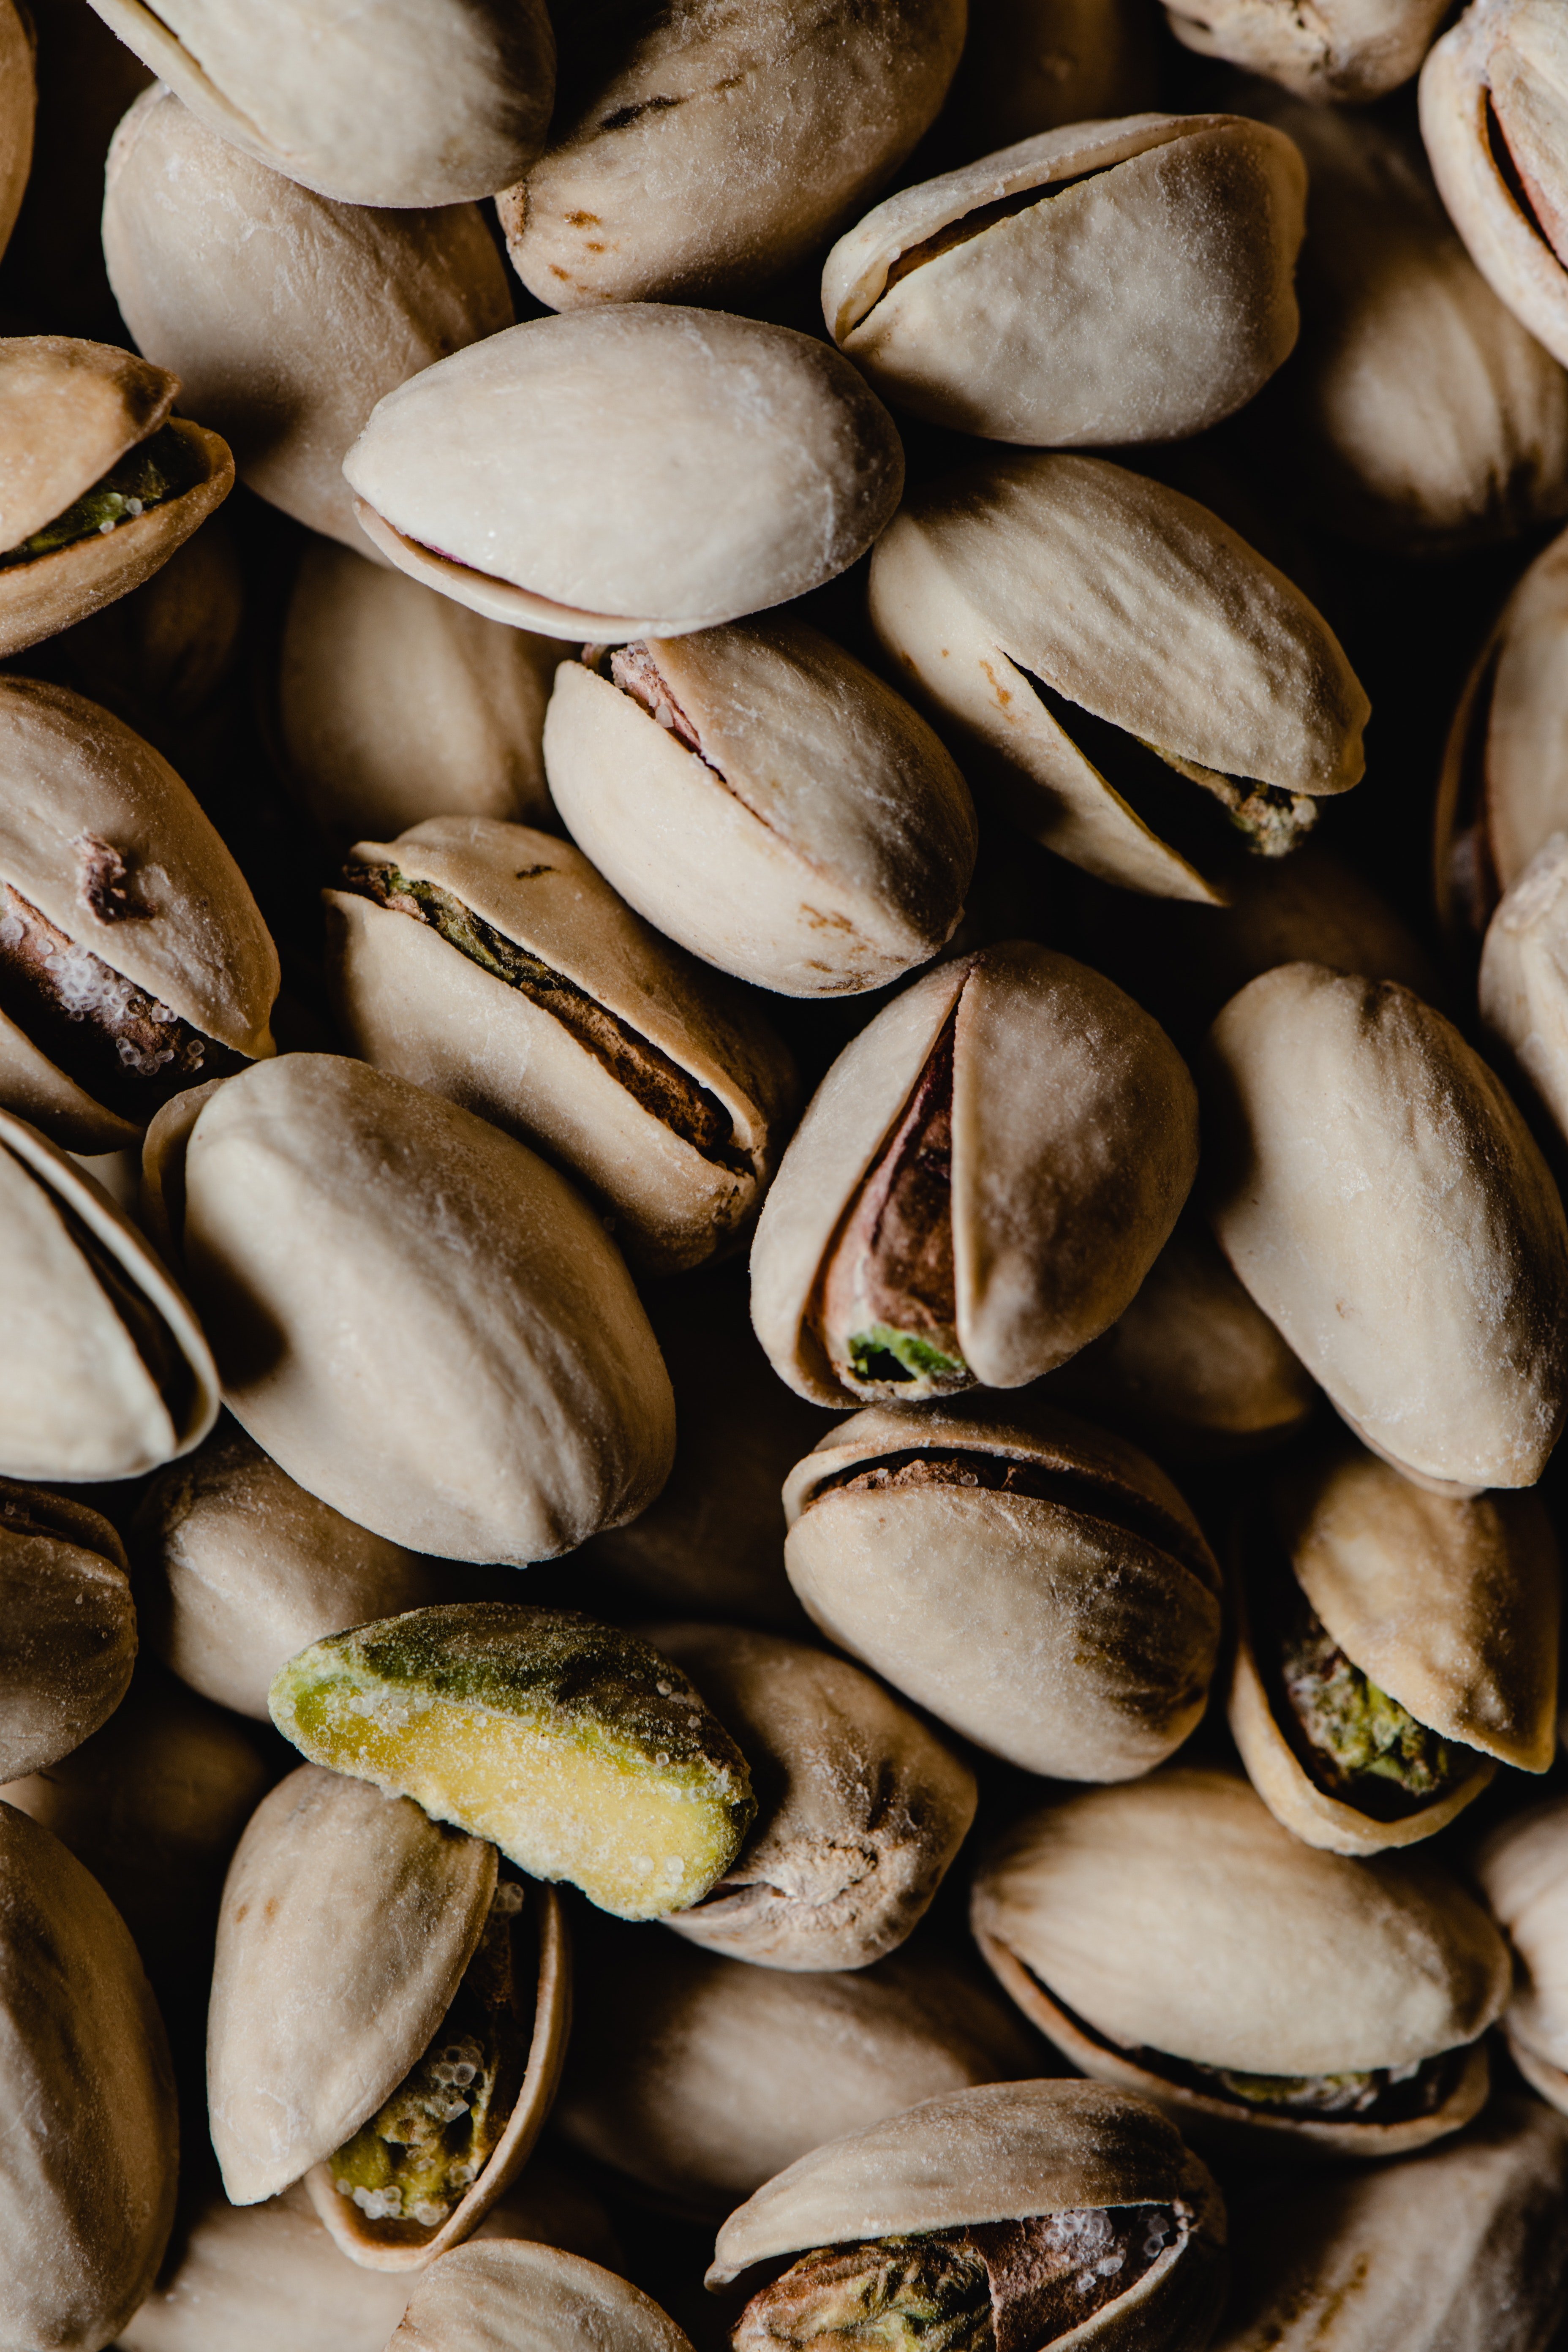 Pictured - A photograph of brown Pistachios | Source: Pexels 